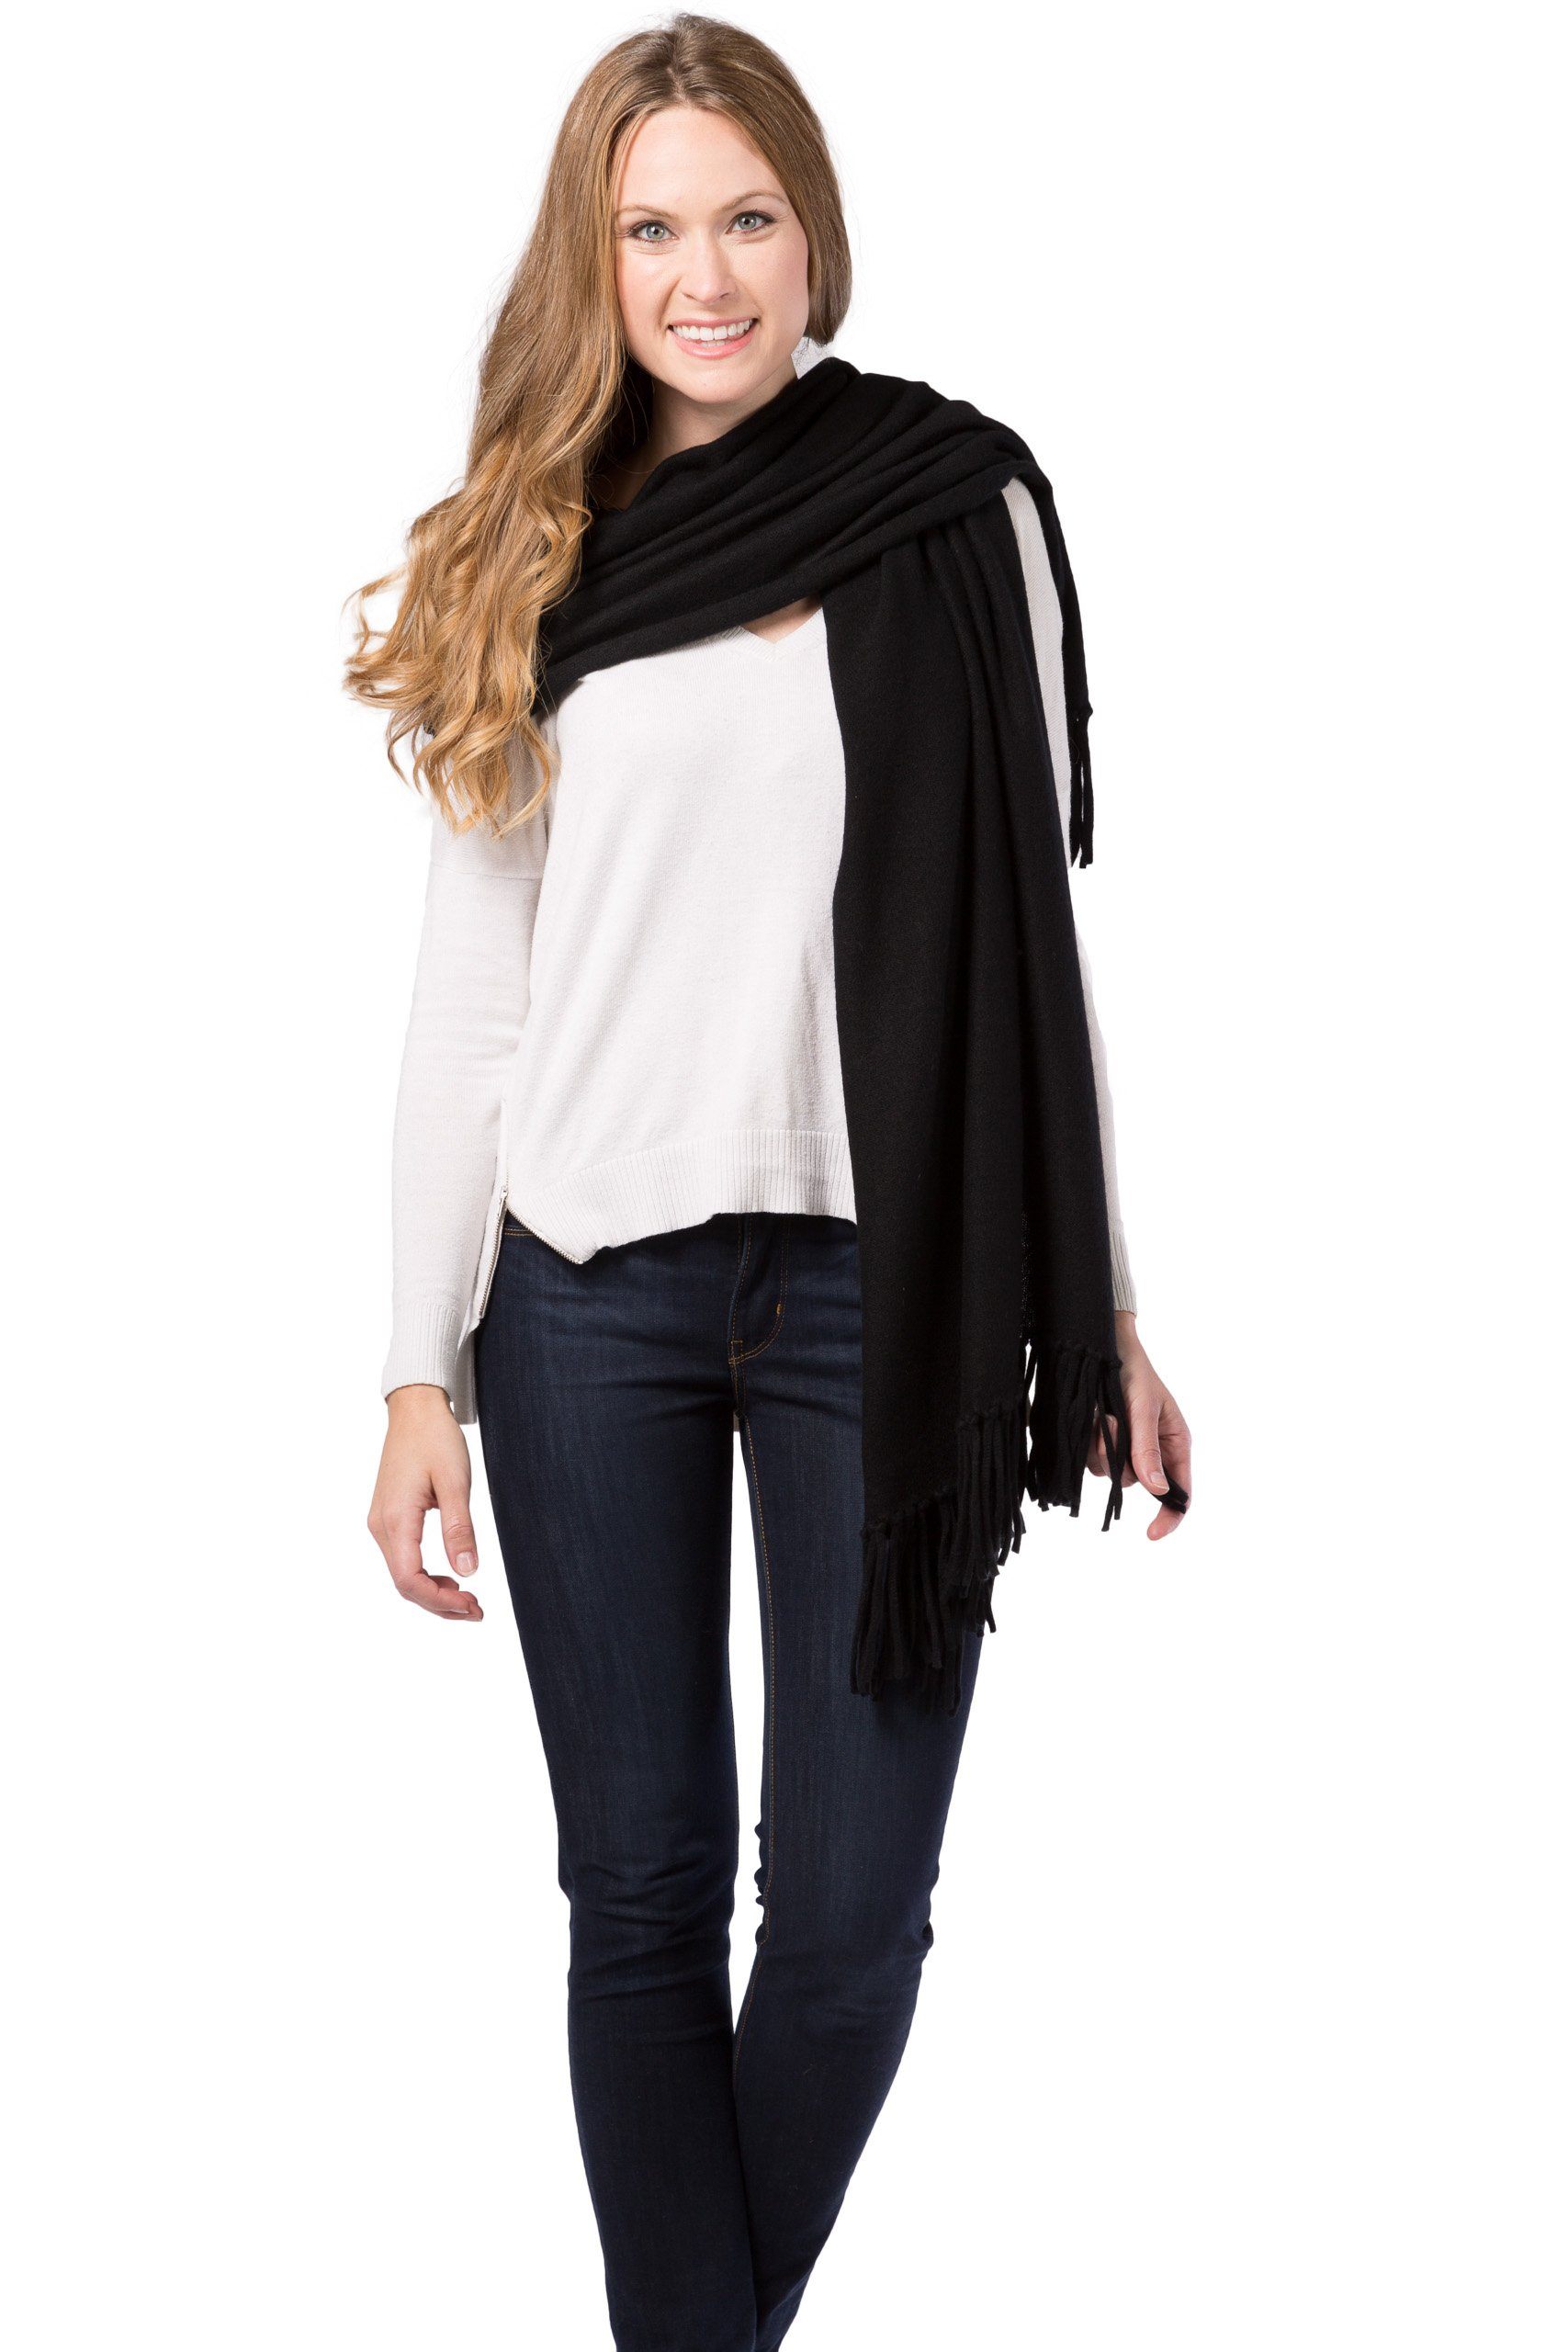 Women's 100% Pure Cashmere Knit Shawl Wrap with Fringe and Gift Box Womens>Accessories>Scarf Fishers Finery Black 